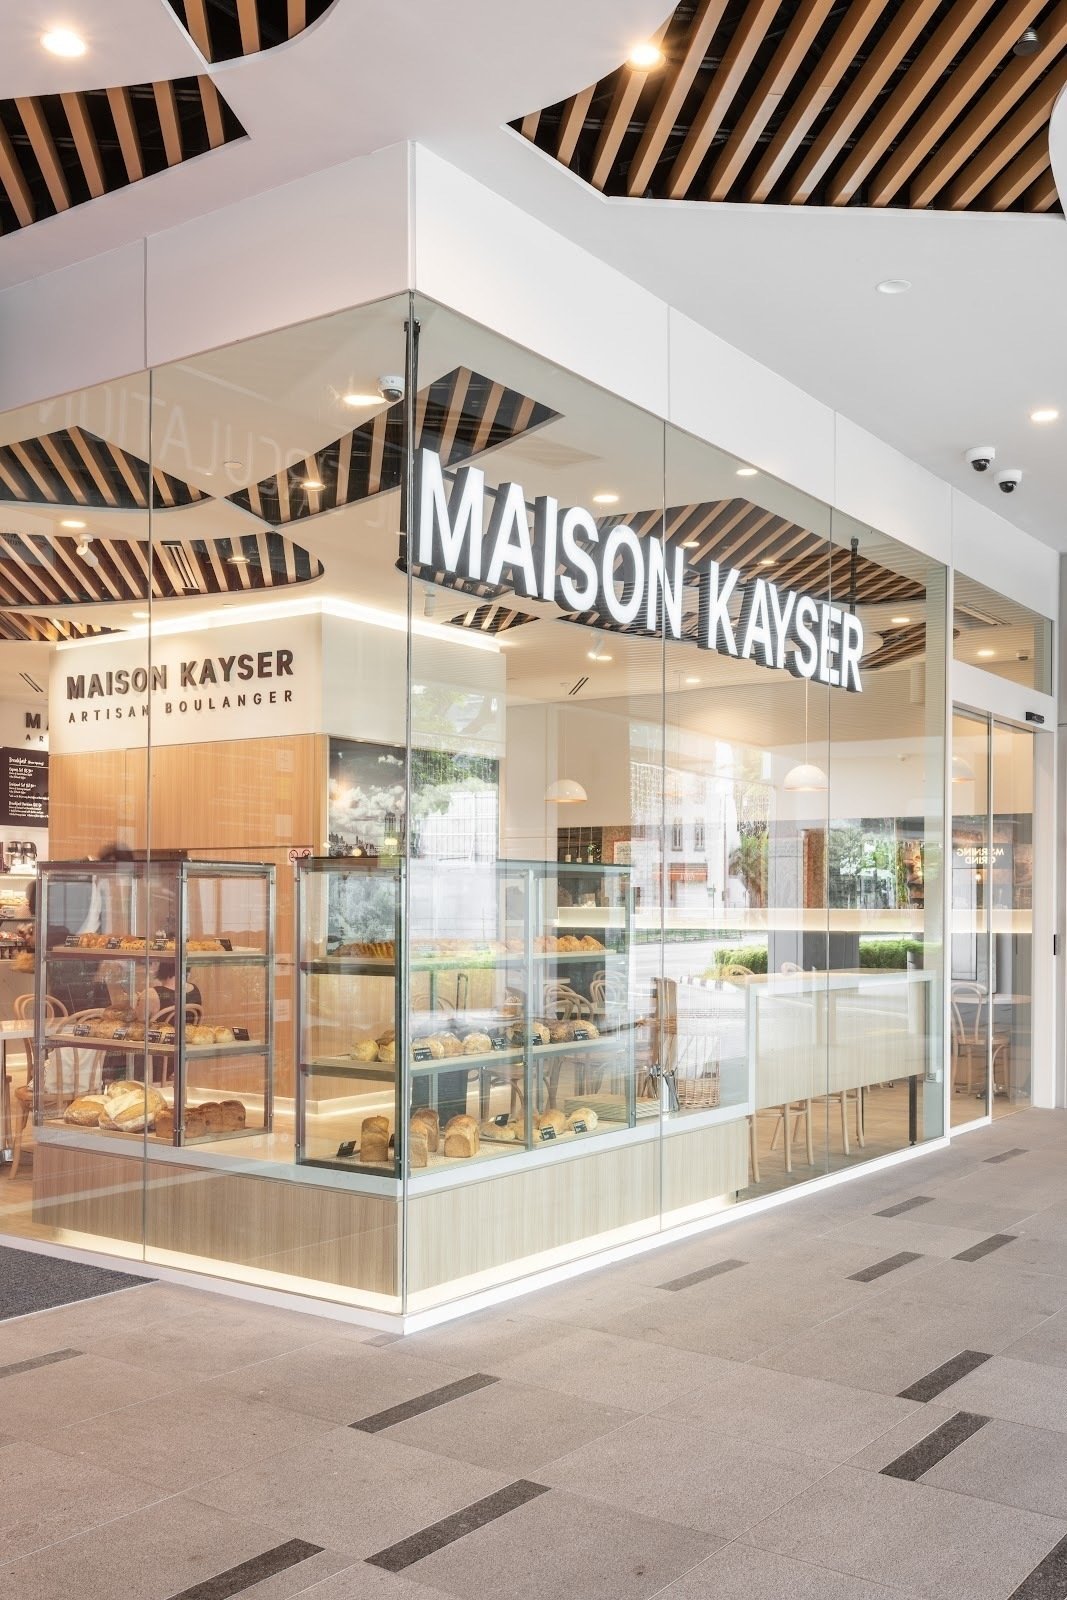 <span class="translation_missing" title="translation missing: en.meta.location_title, location_name: Maison Kayser China Square Central, city: Singapore">Location Title</span>